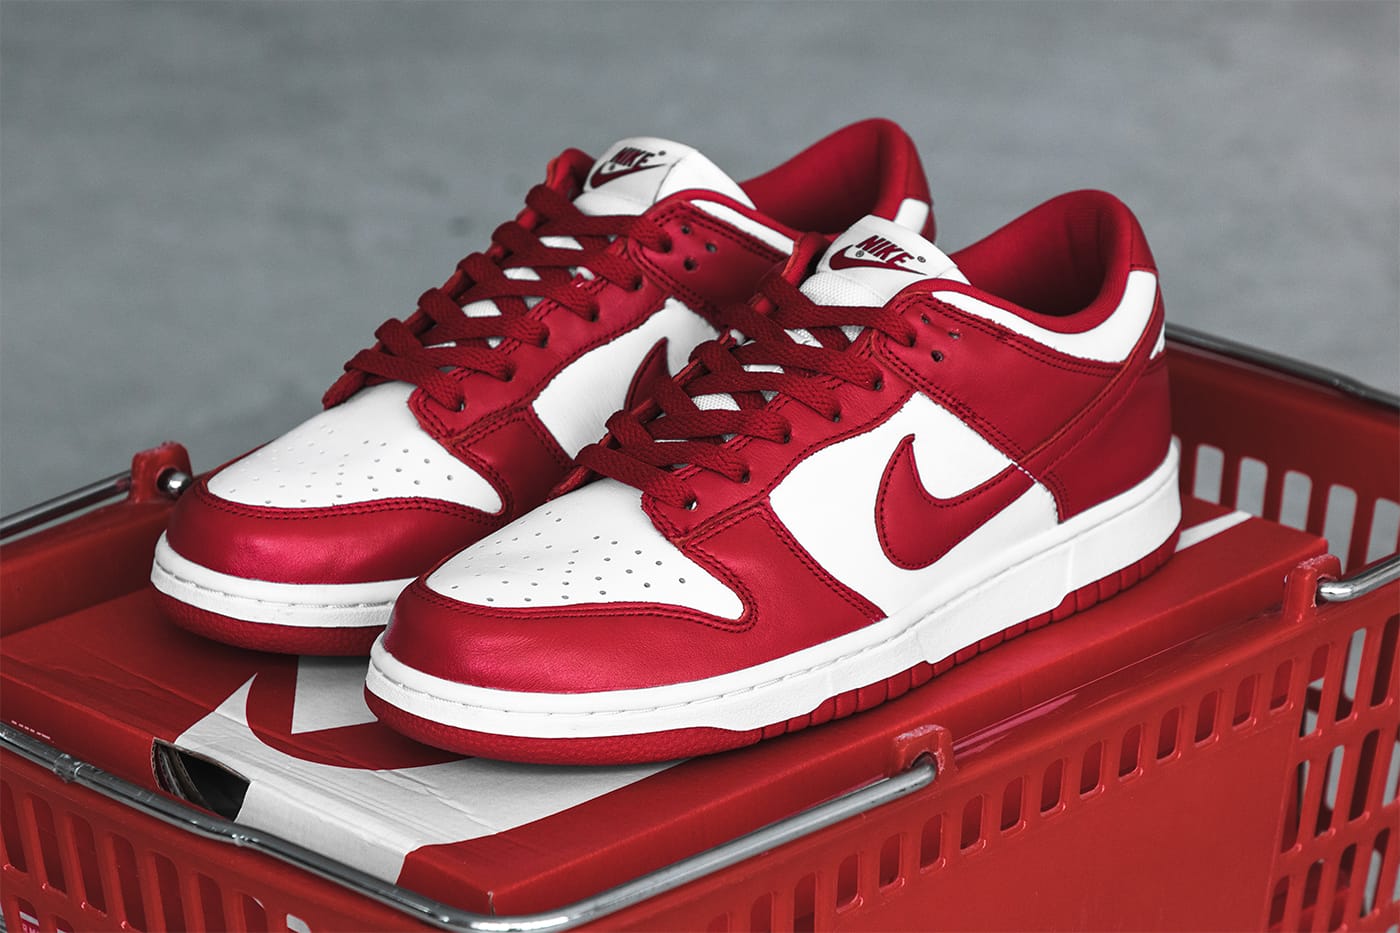 Nike DunkLow SP White and University Red